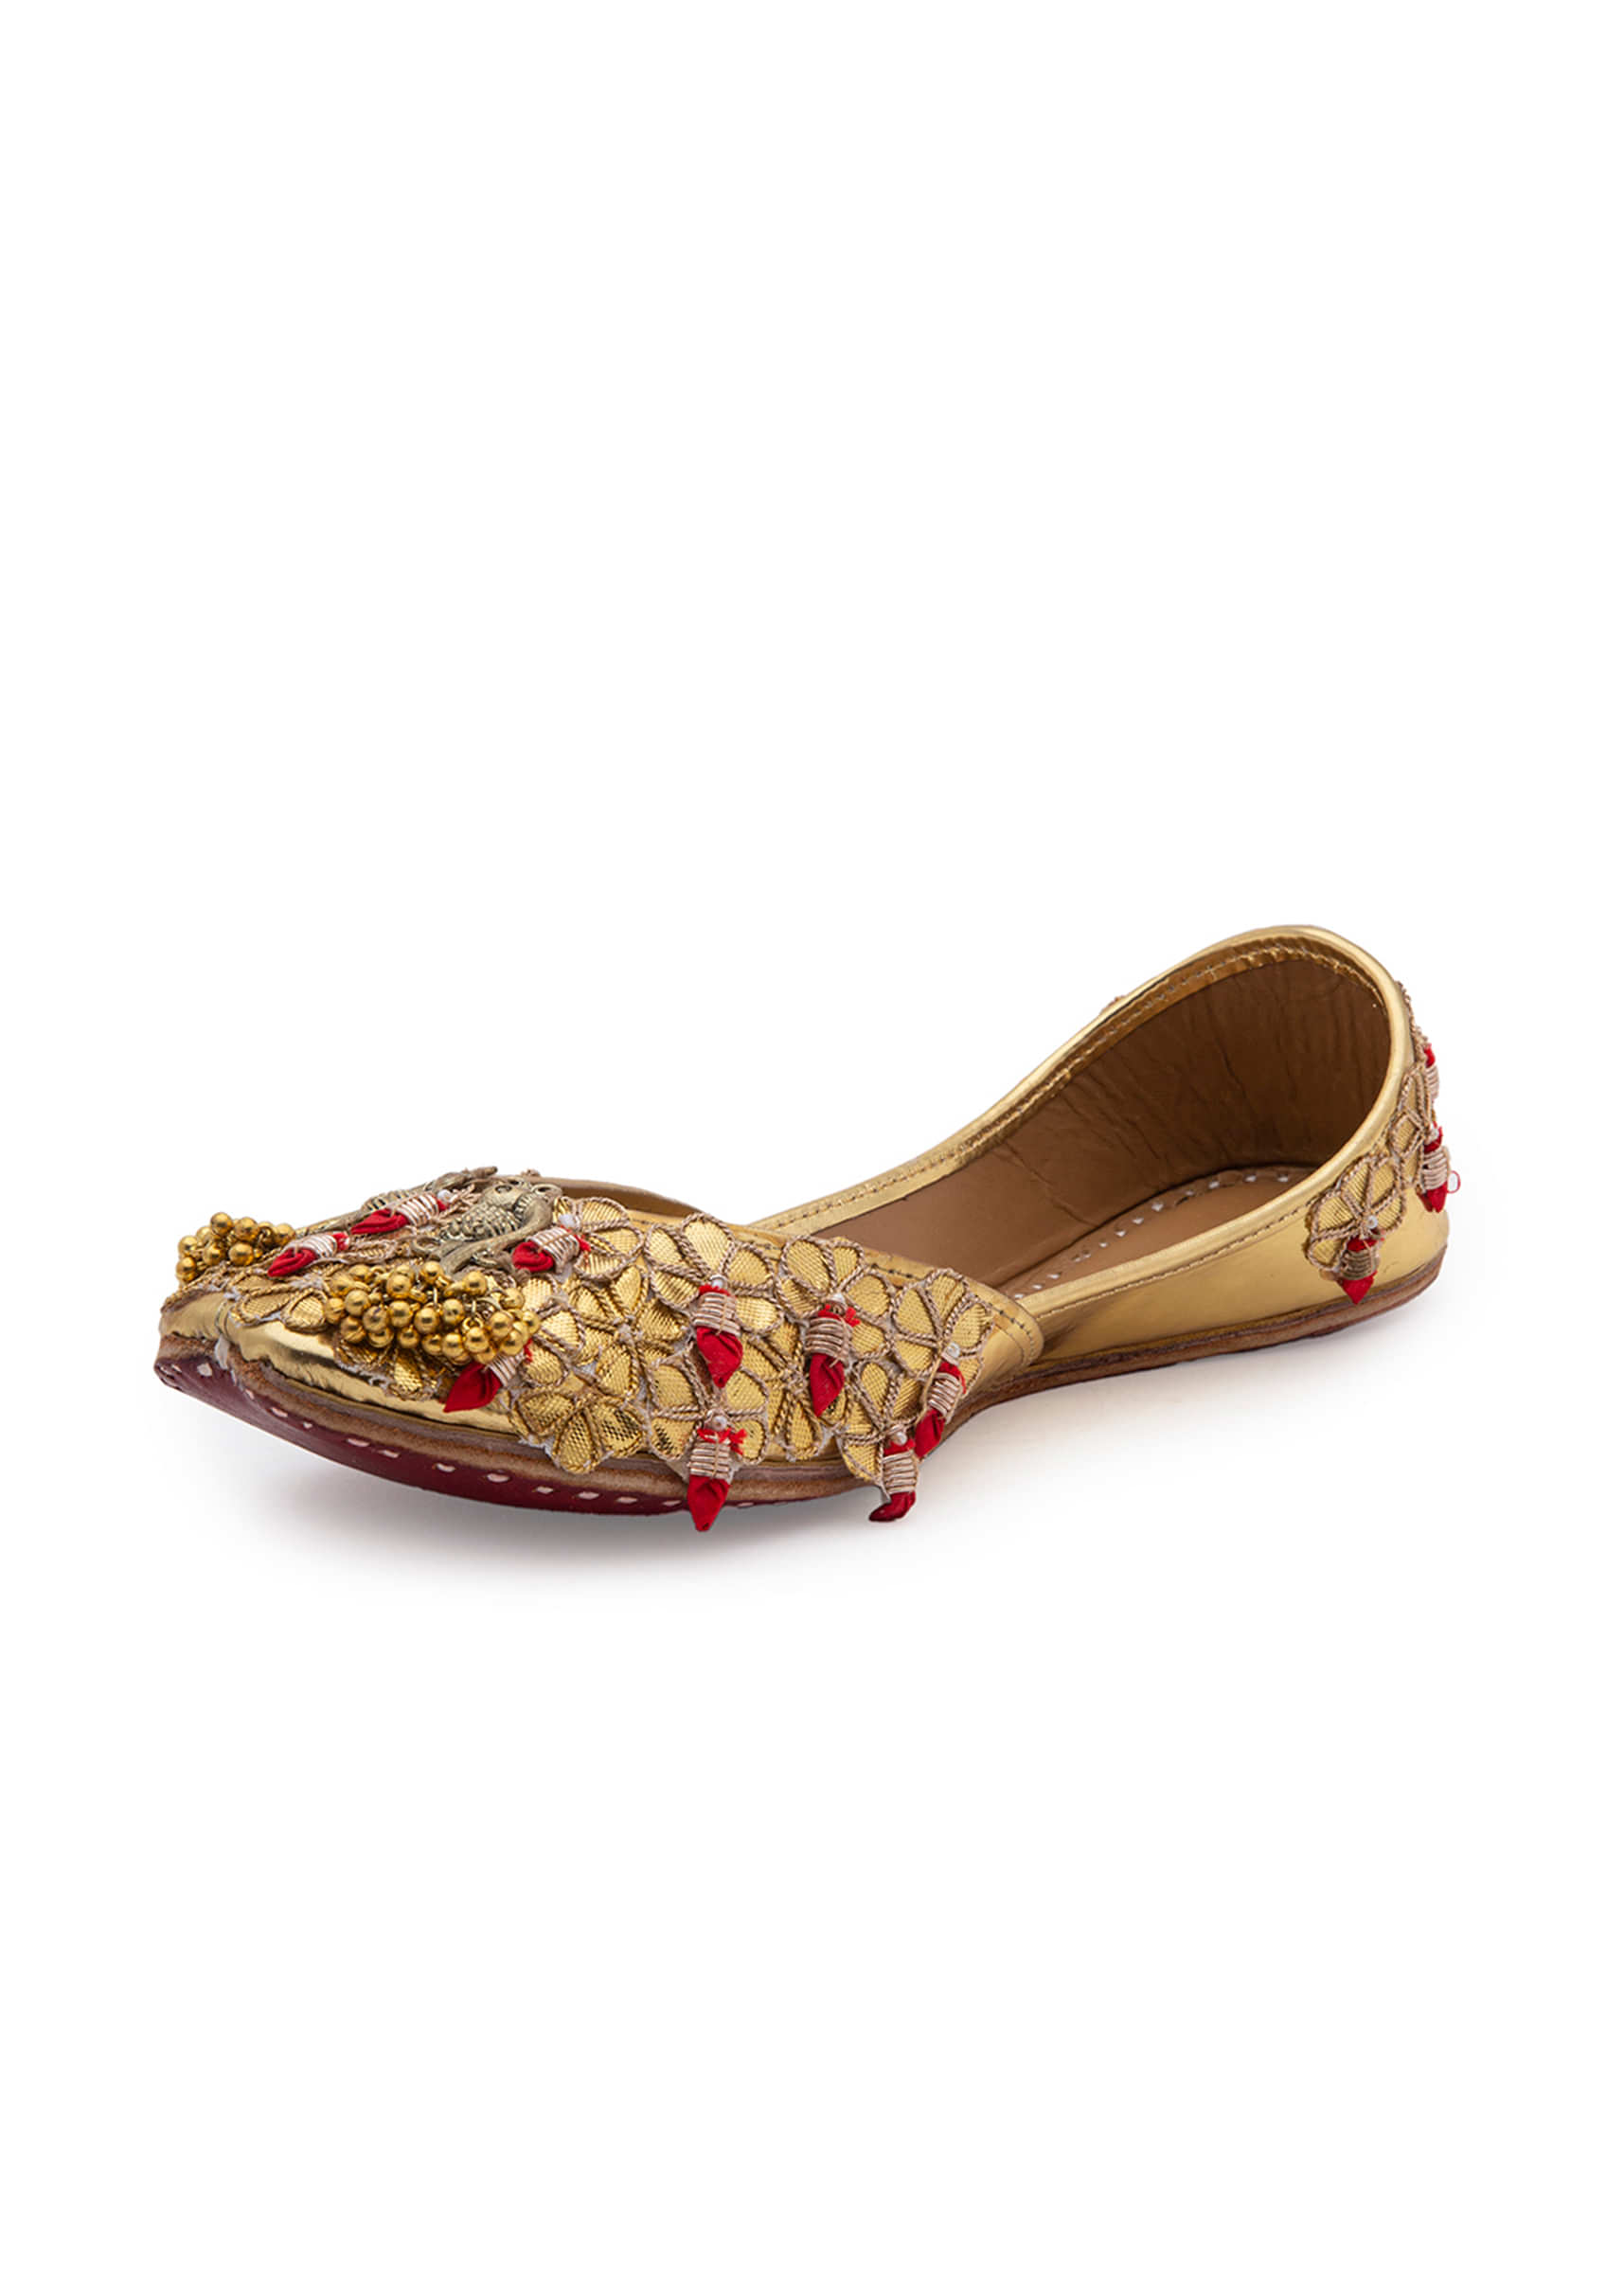 Gold Juttis With Red And Gold Gotta Patti Embroidery All Over And Tiny Ghungroos By 5 Elements